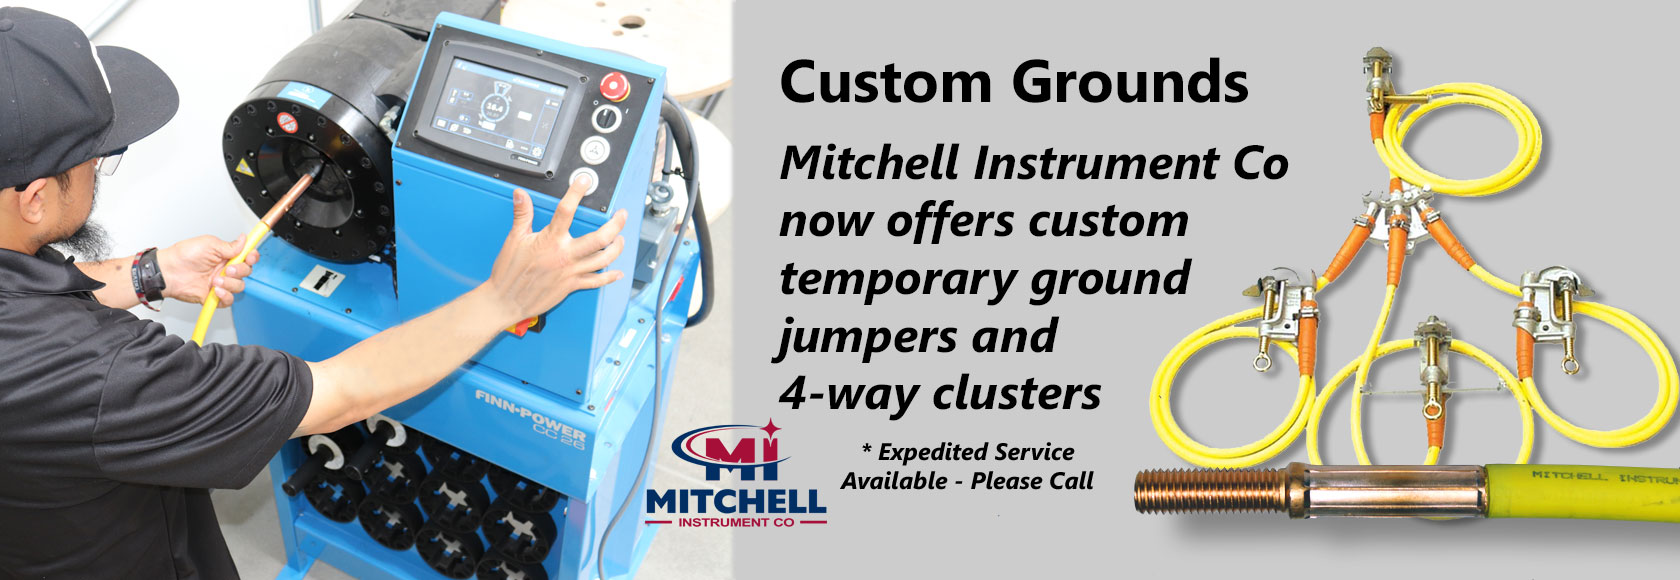 Mitchell Instrument Co Now Offers Custom Temporary Grounding Jumpers and Clusters